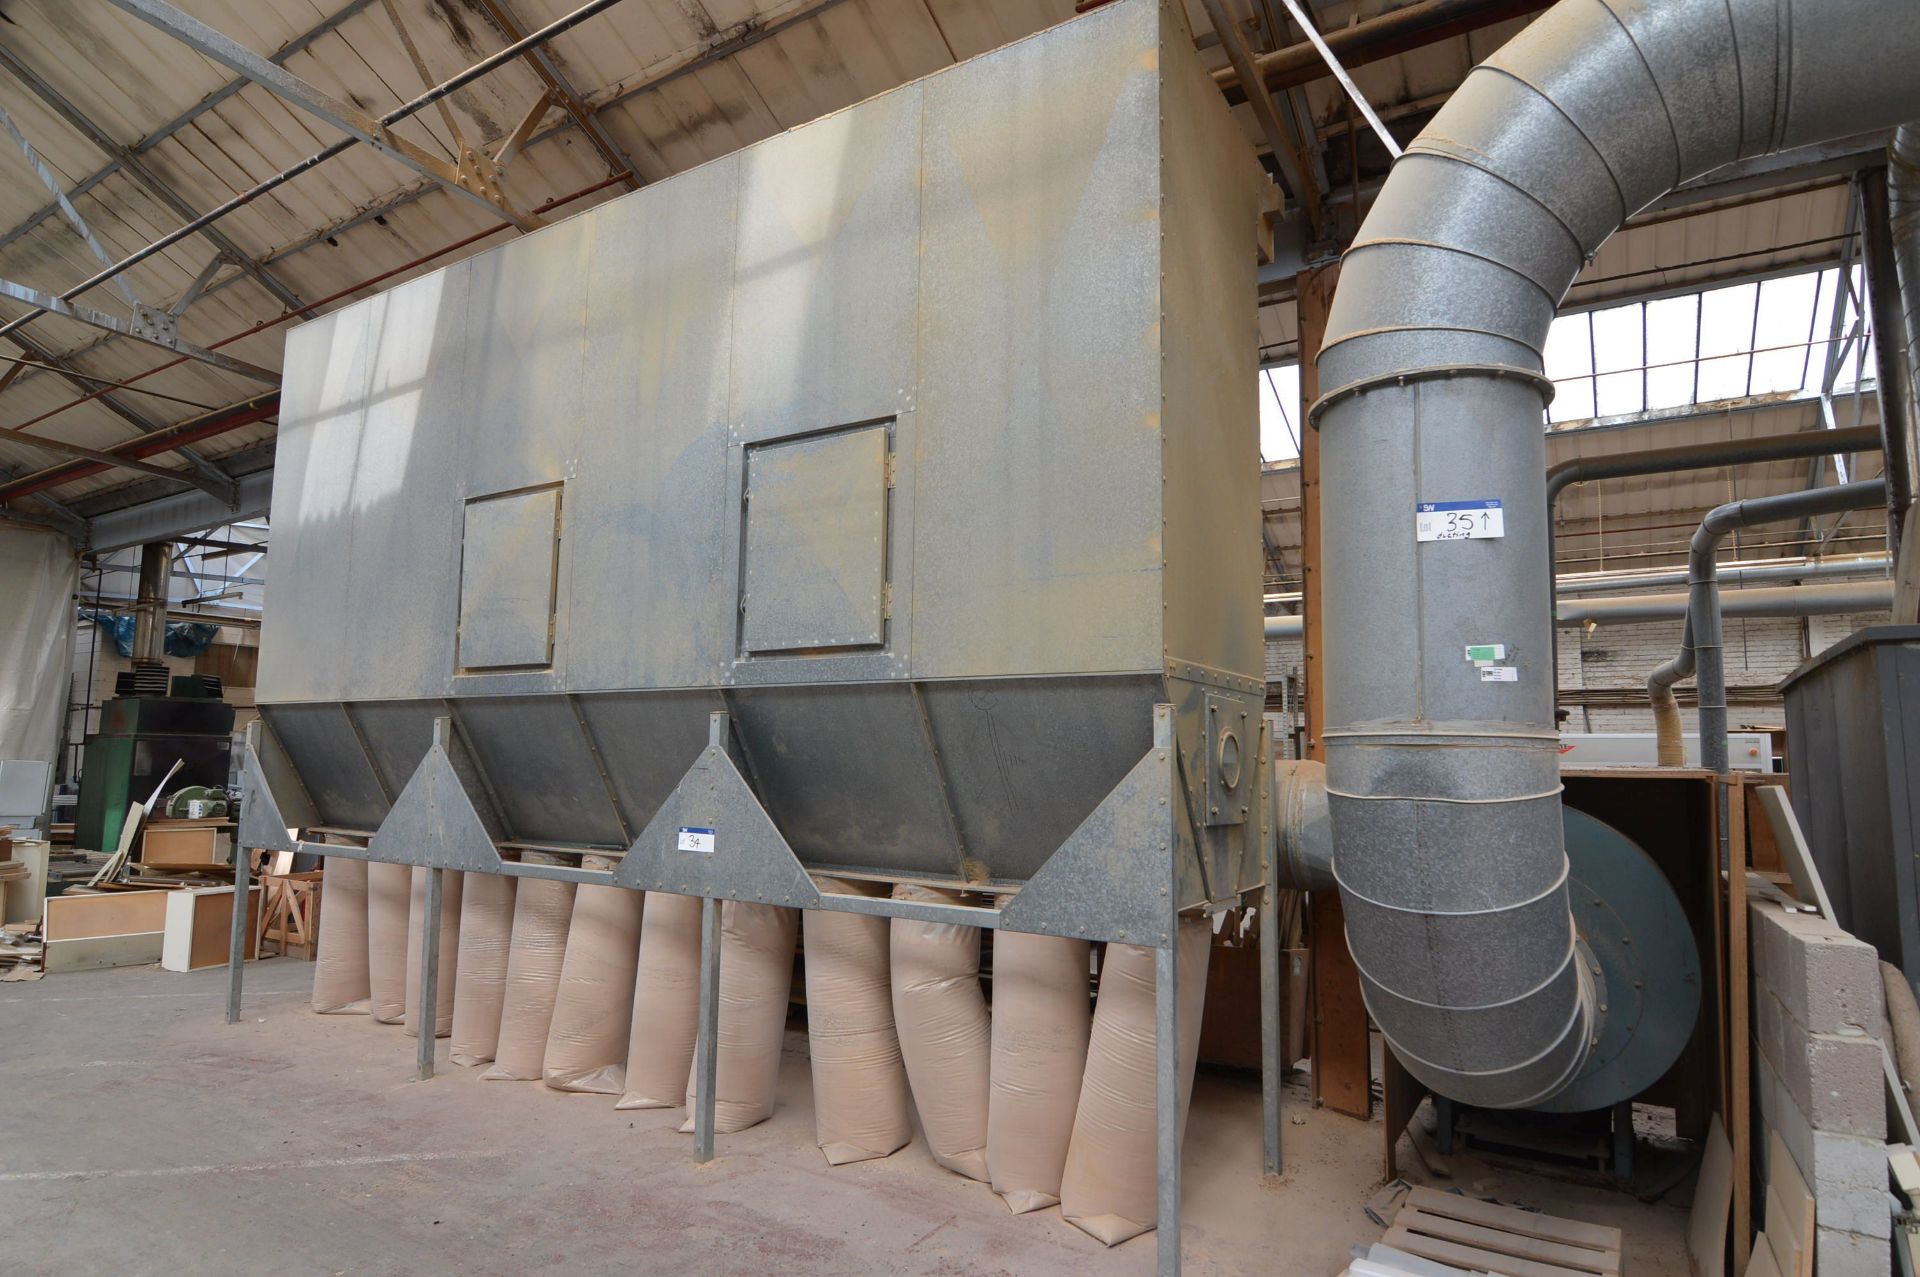 GALVANISED STEEL CASED 12-BAG DUST COLLECTION UNIT, with centrifugal fan and ducting to first bolted